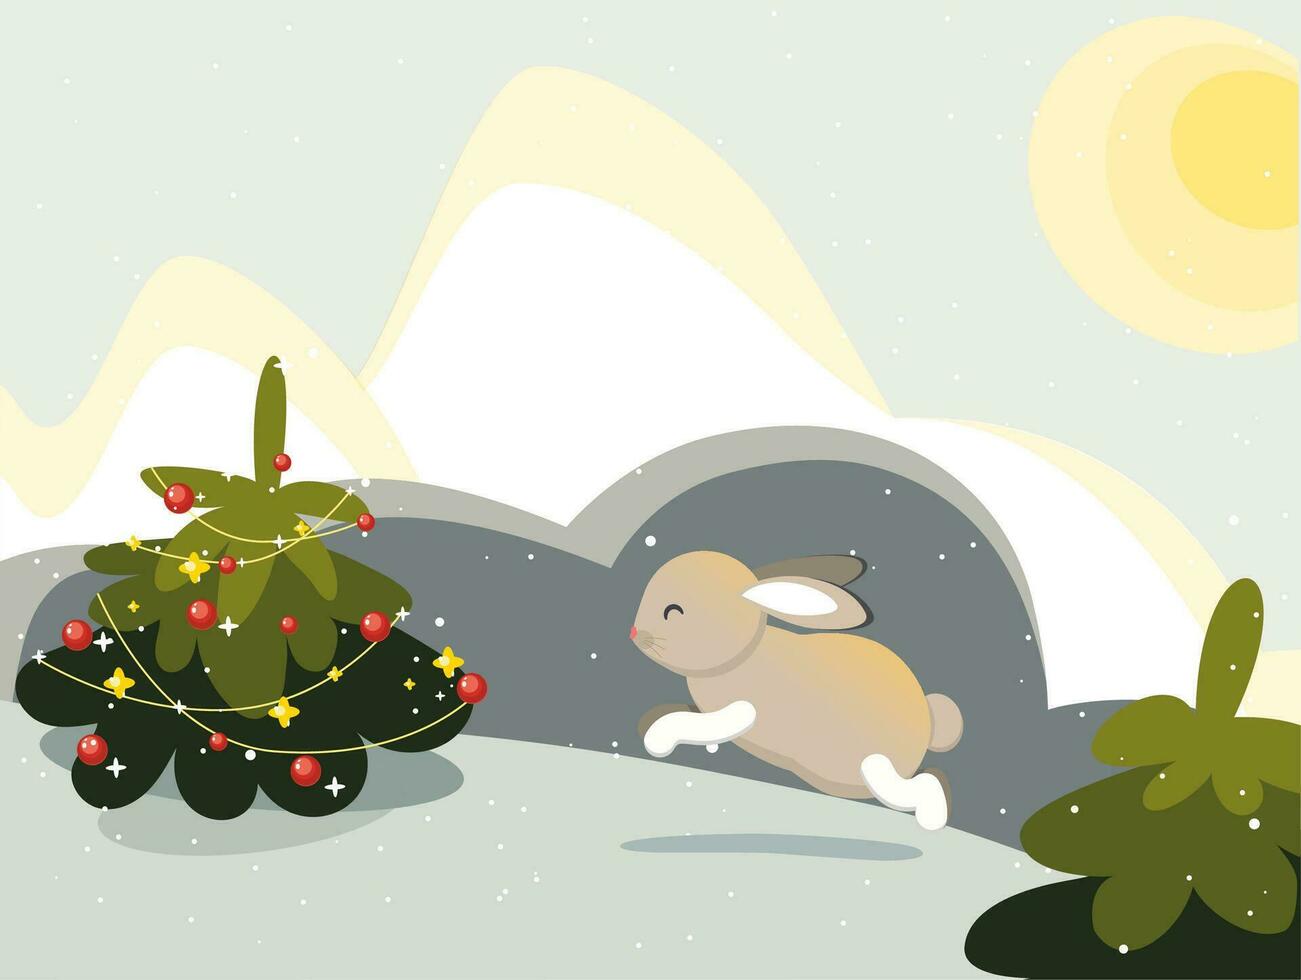 Rabbit in the winter in the New Year's forest. Winter evening landscape. Christmas tree decorated for the new year. Vector illustration